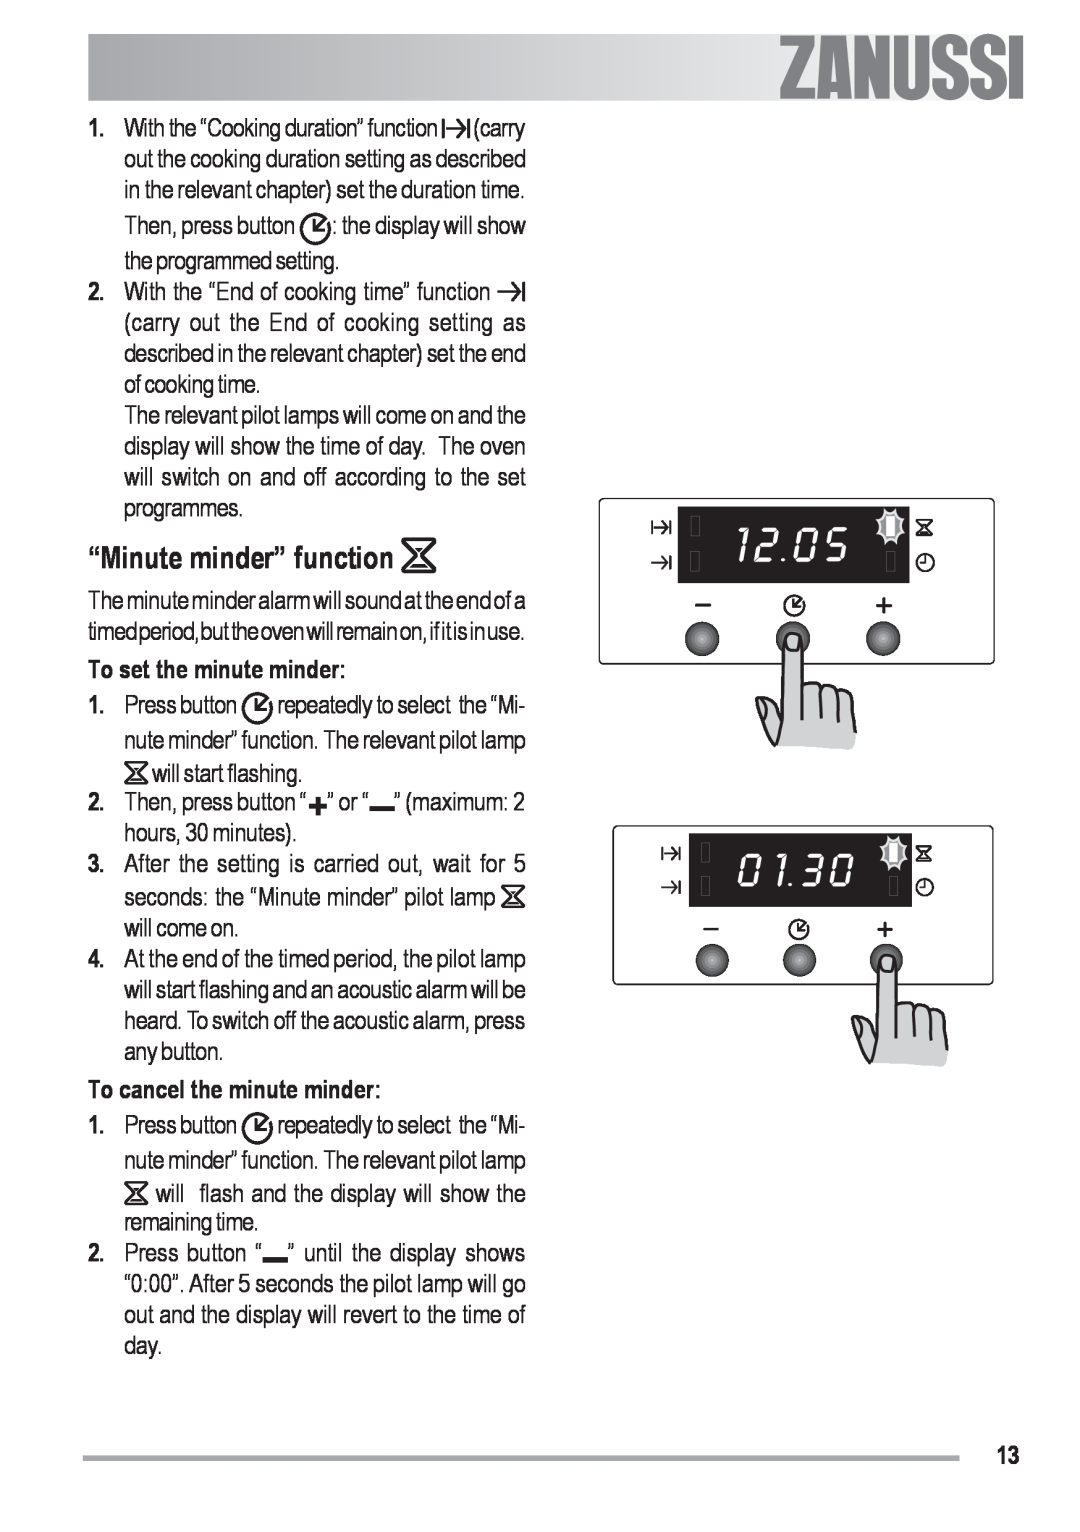 Zanussi ZOB 330 manual “Minute minder” function, To set the minute minder, To cancel the minute minder, Press button 